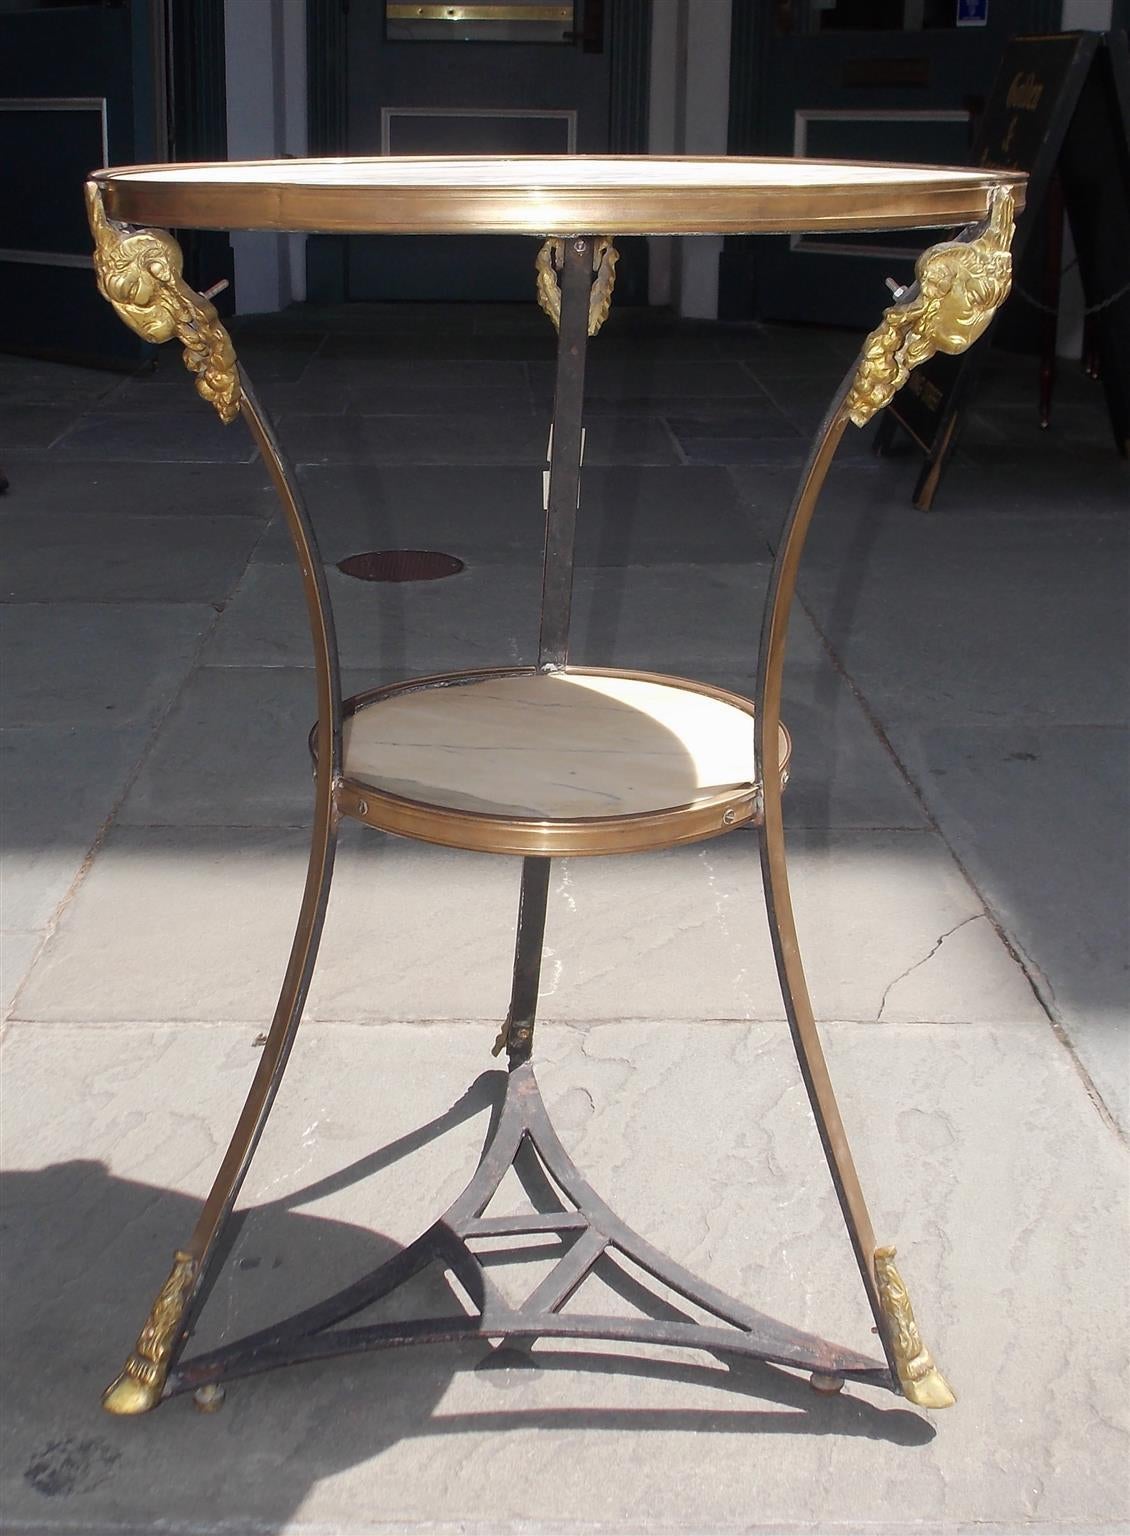 Neoclassical Italian Marble and Brass Bistro Table, Circa 1820